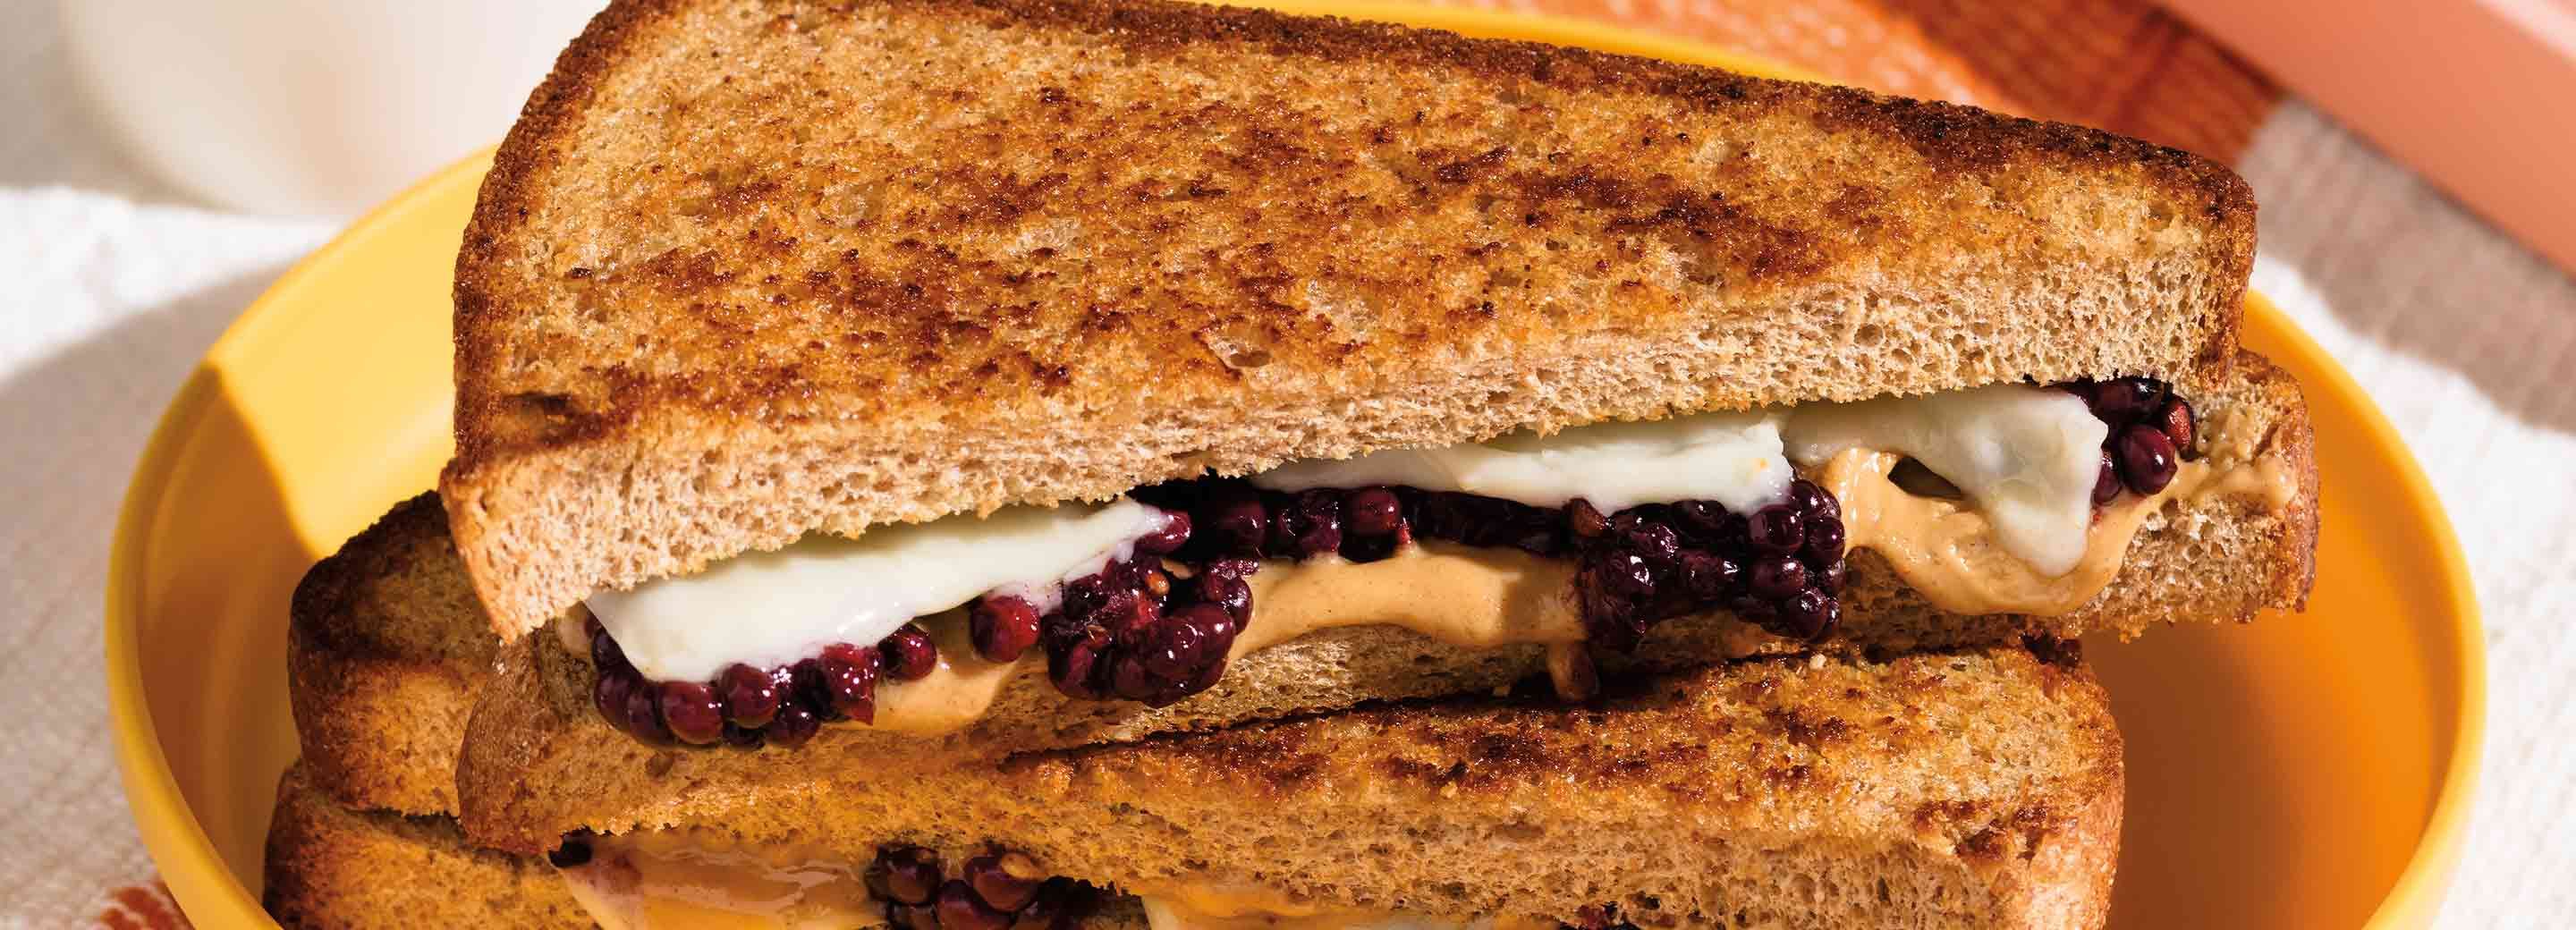 Peanut Butter & Blackberry Grilled Cheese